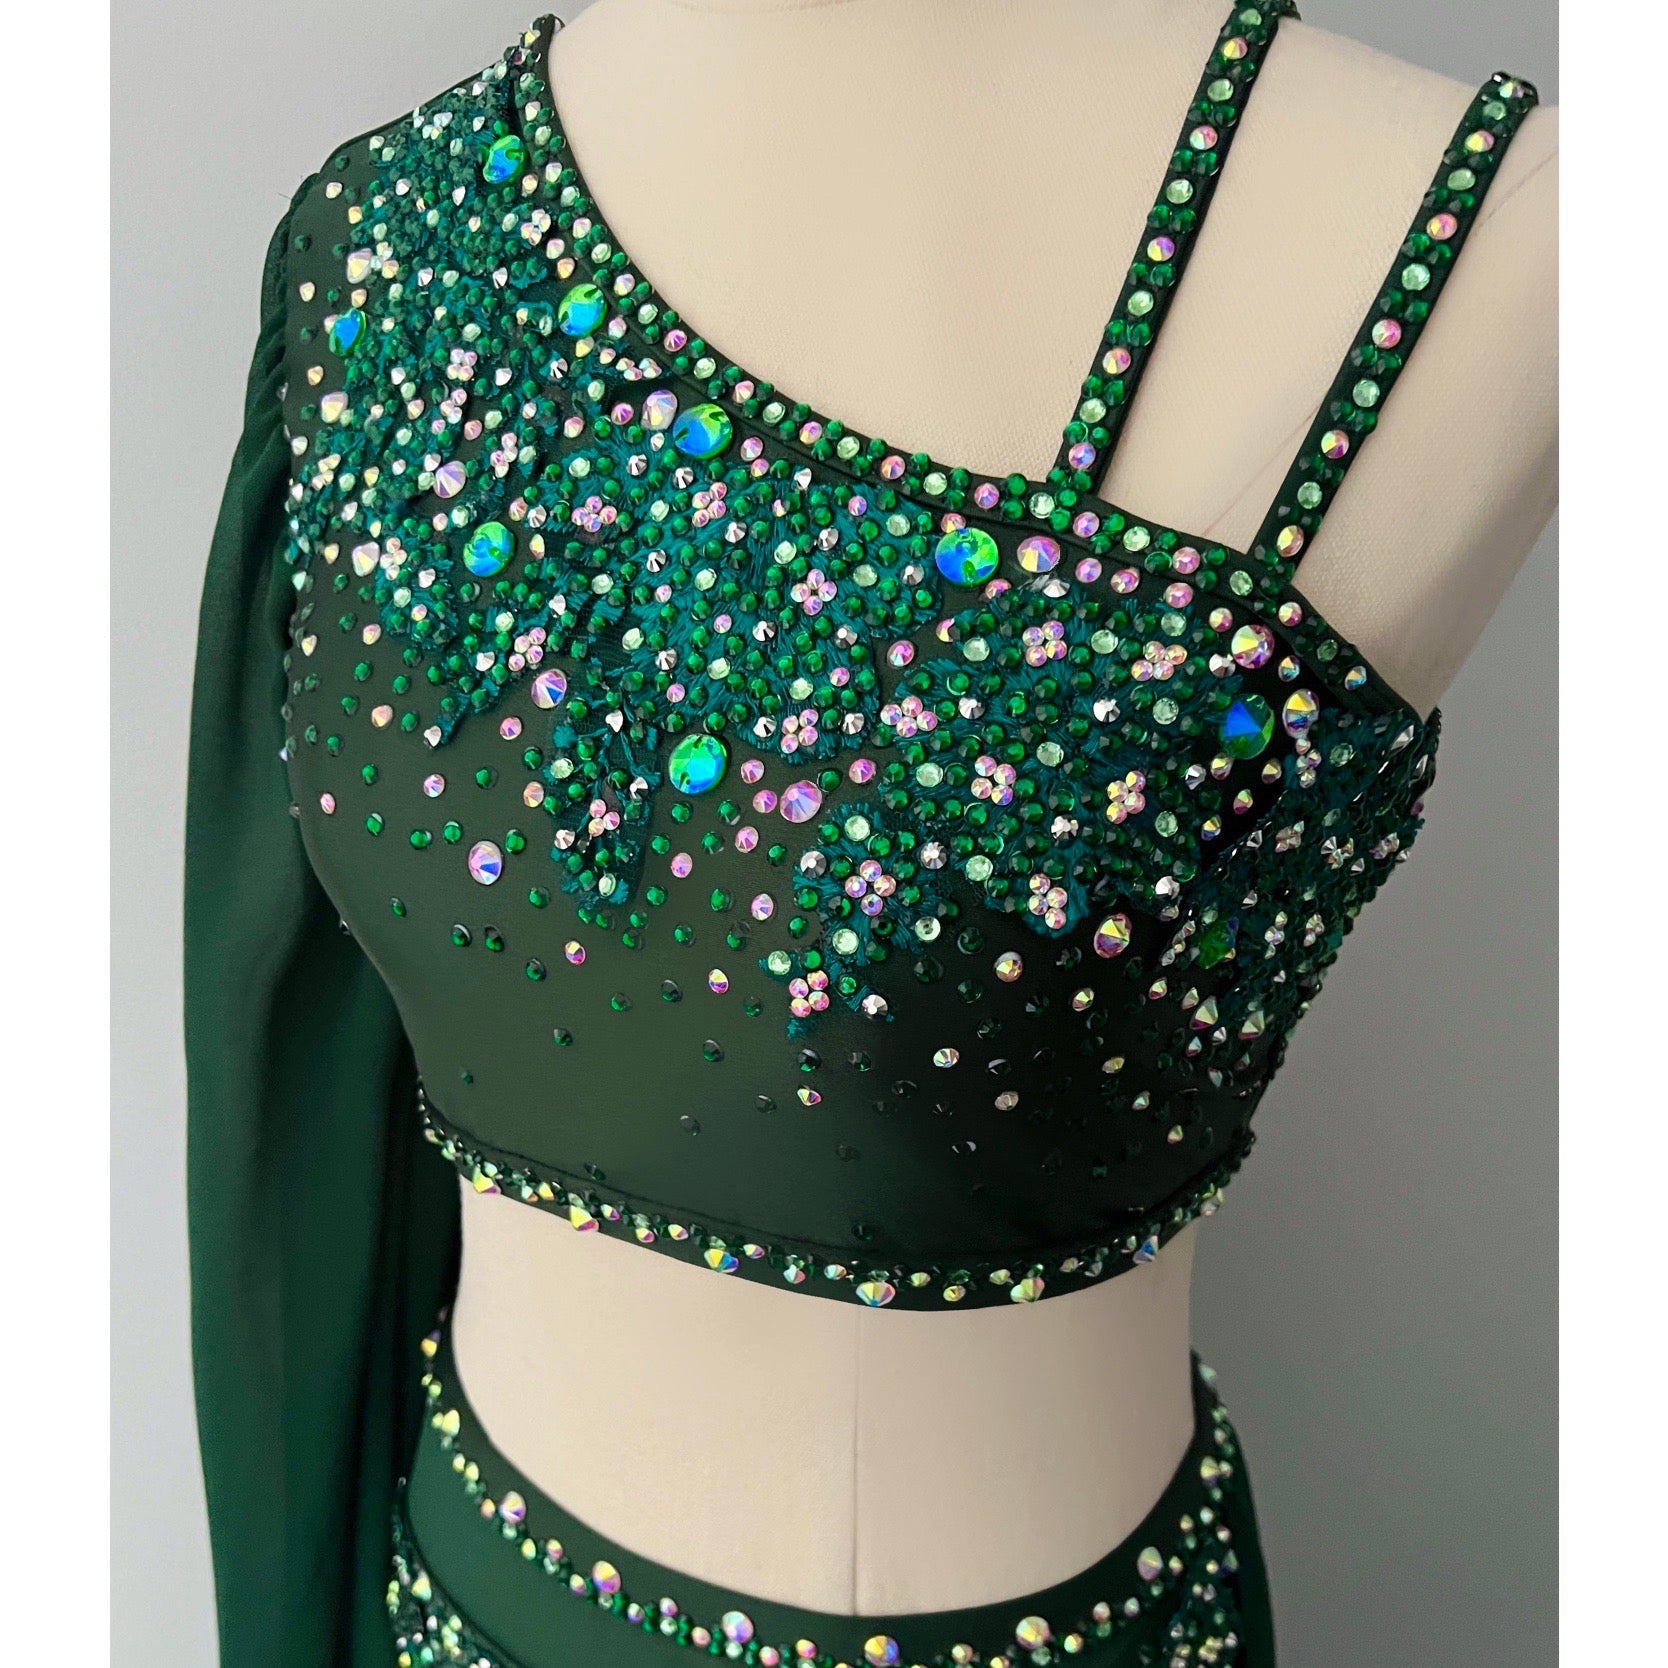 Adult Small | Forest Green Lyrical Dance Costume - Sparkle Worldwide